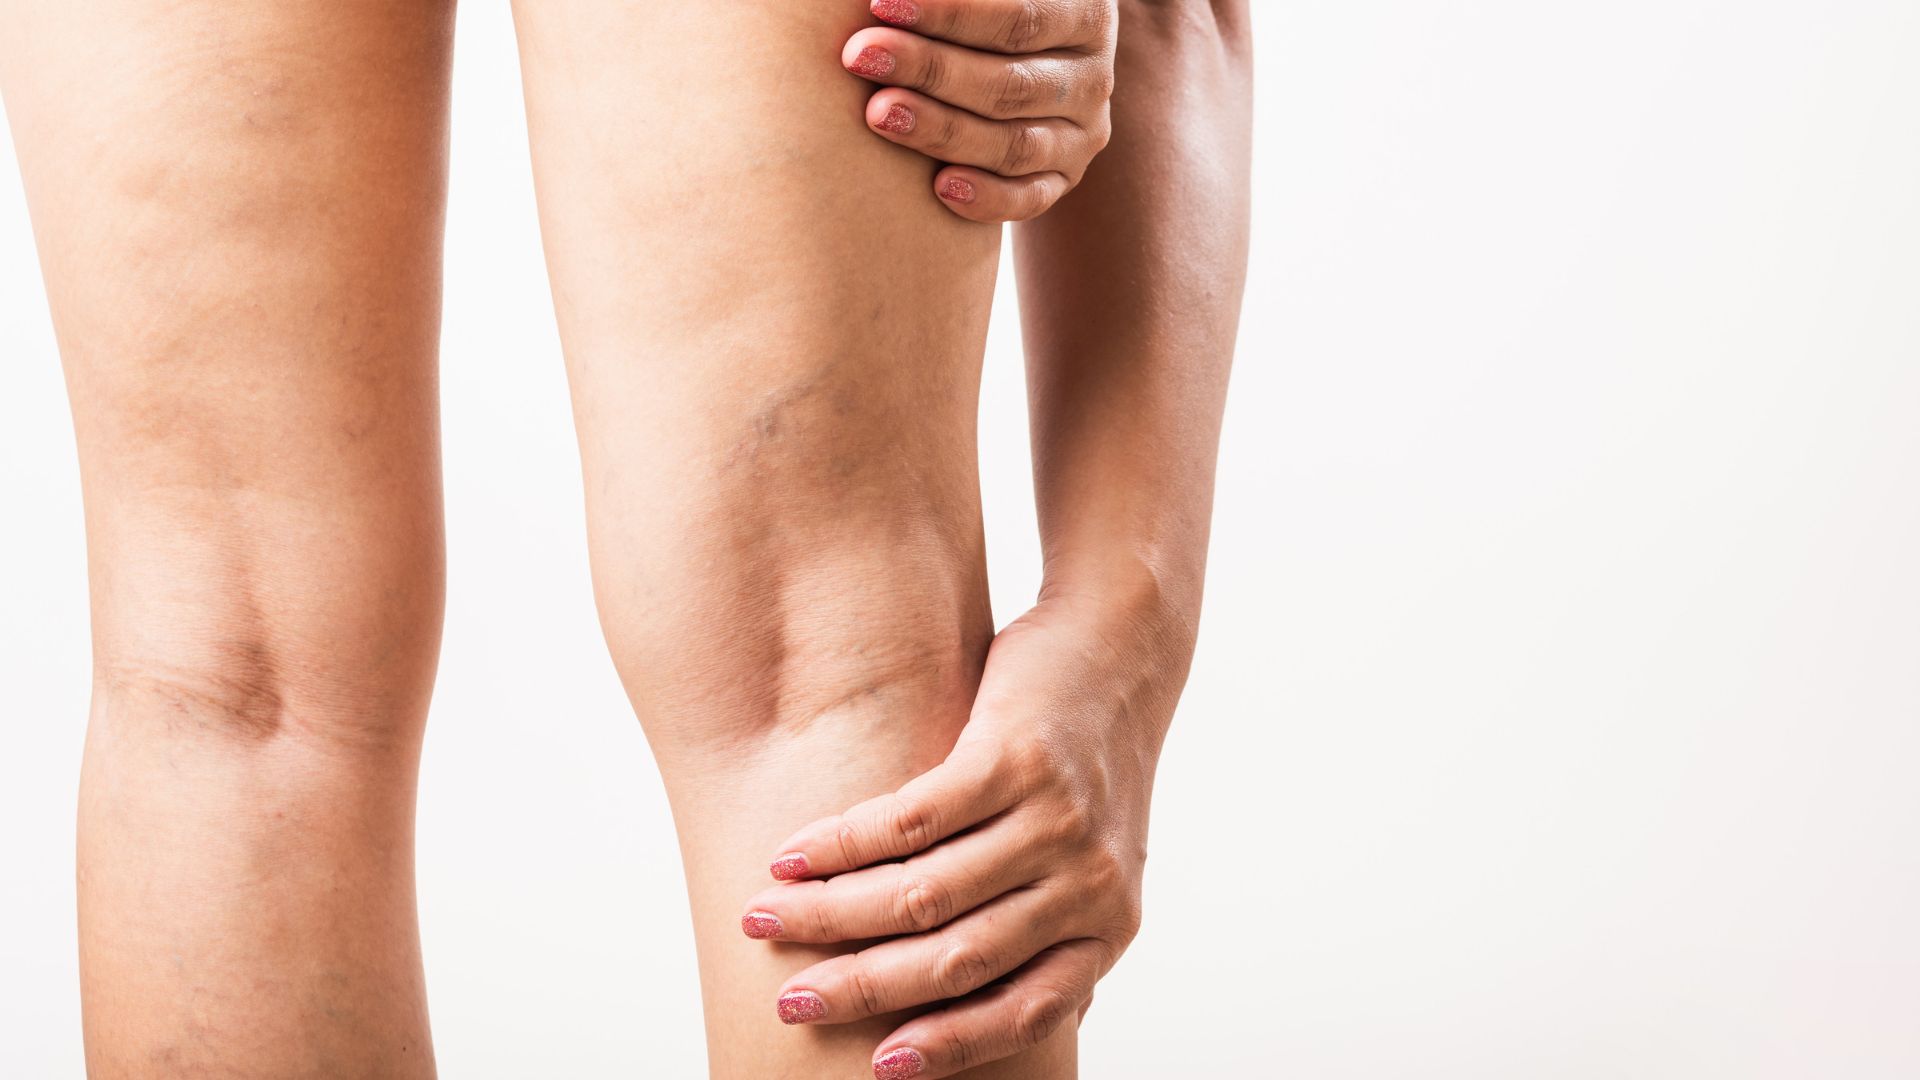 Varicose veins during pregnancy - what you need to know